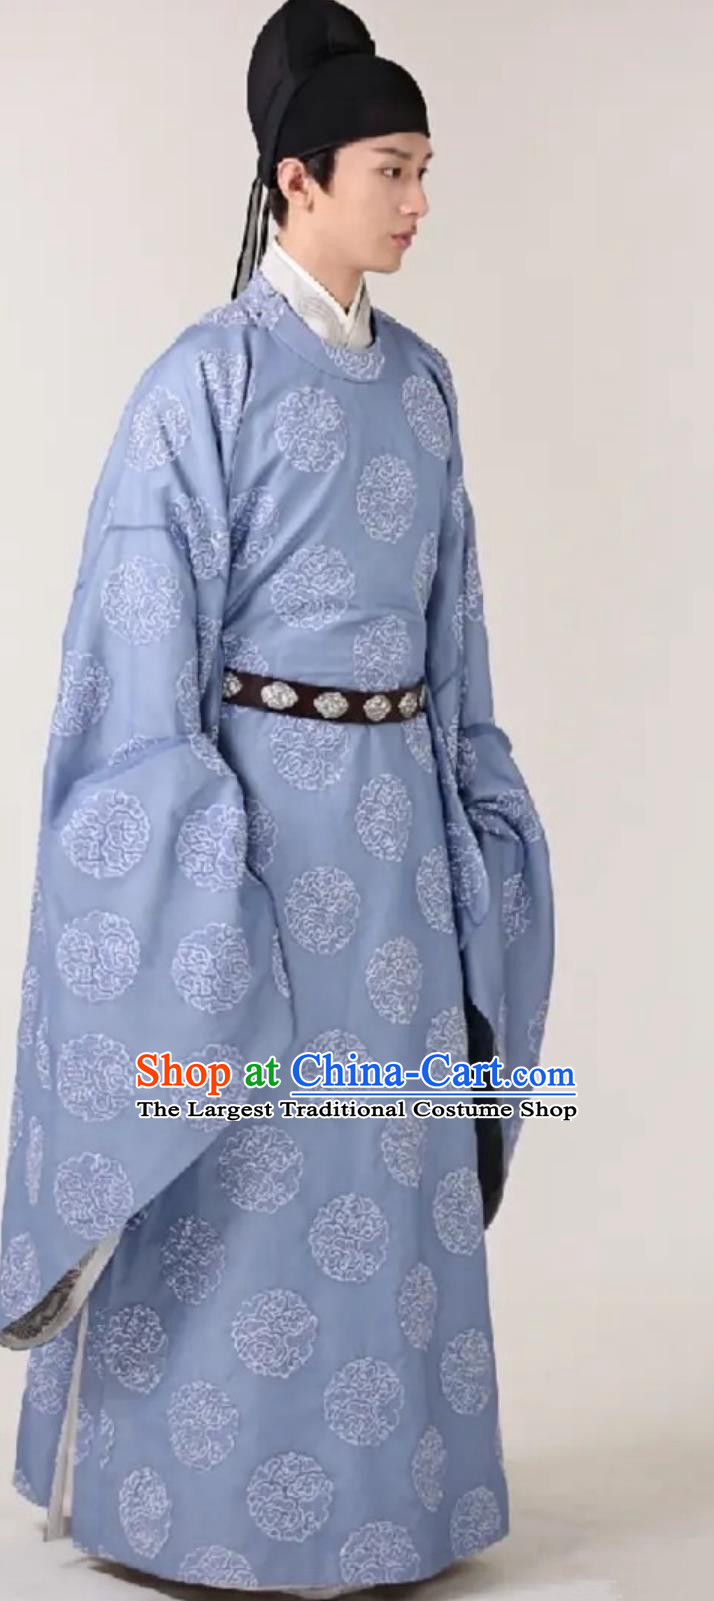 Ancient Chinese Tang Dynasty Male Clothing China Traditional Costume 2020 TV Series The Promise of Chang An Prince Xiao Cheng Xu Robes